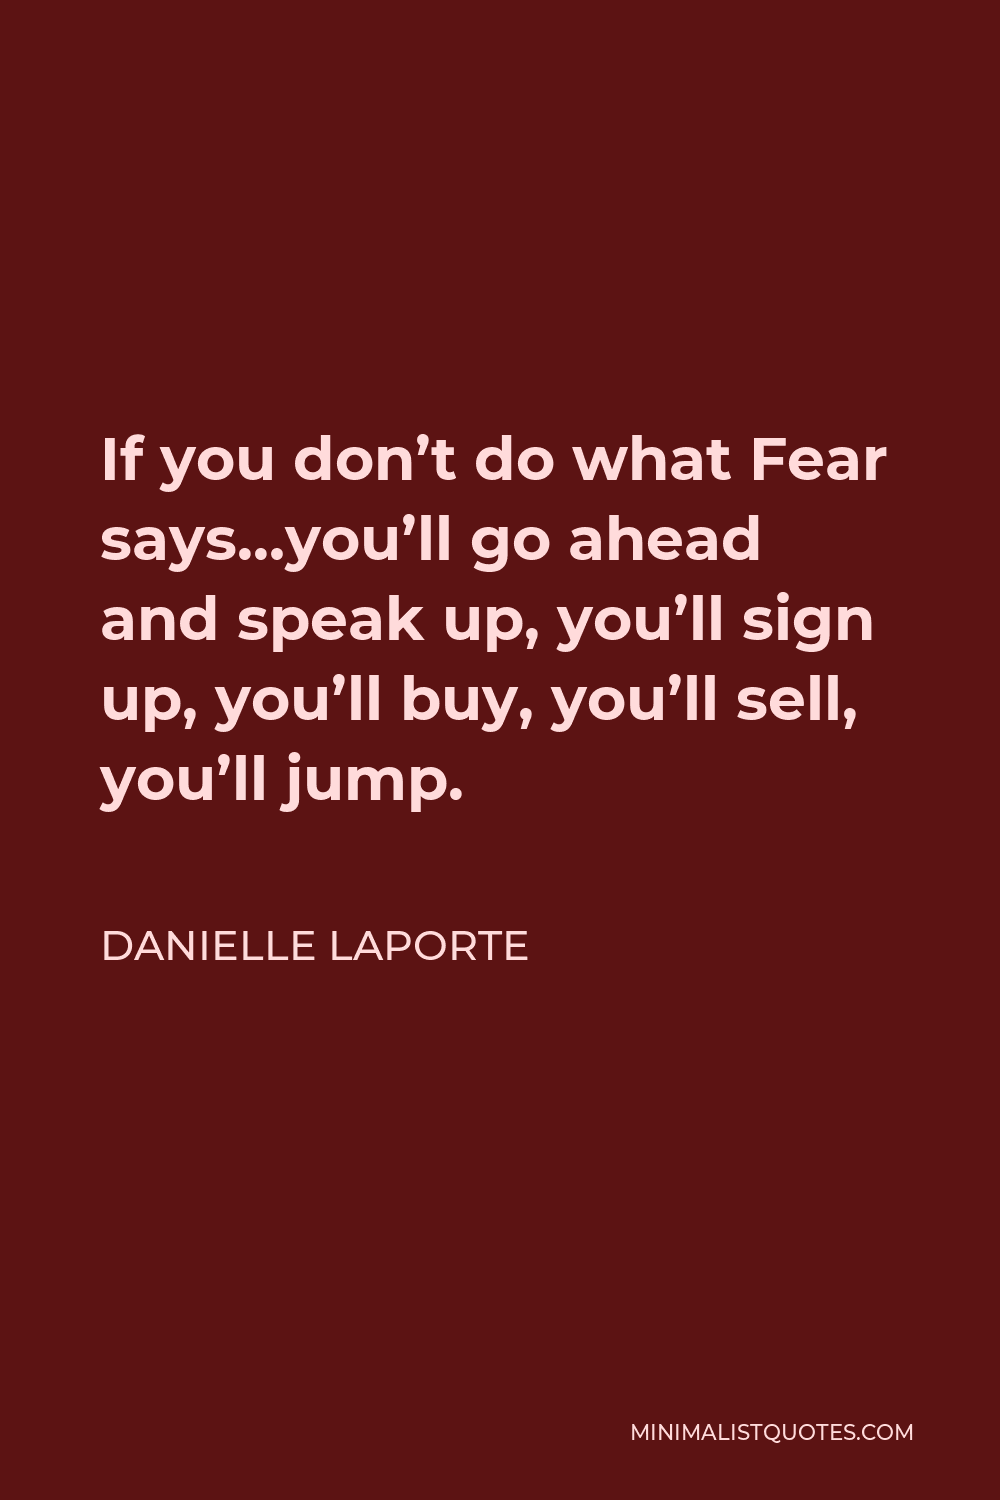 Danielle LaPorte Quote - If you don’t do what Fear says…you’ll go ahead and speak up, you’ll sign up, you’ll buy, you’ll sell, you’ll jump.